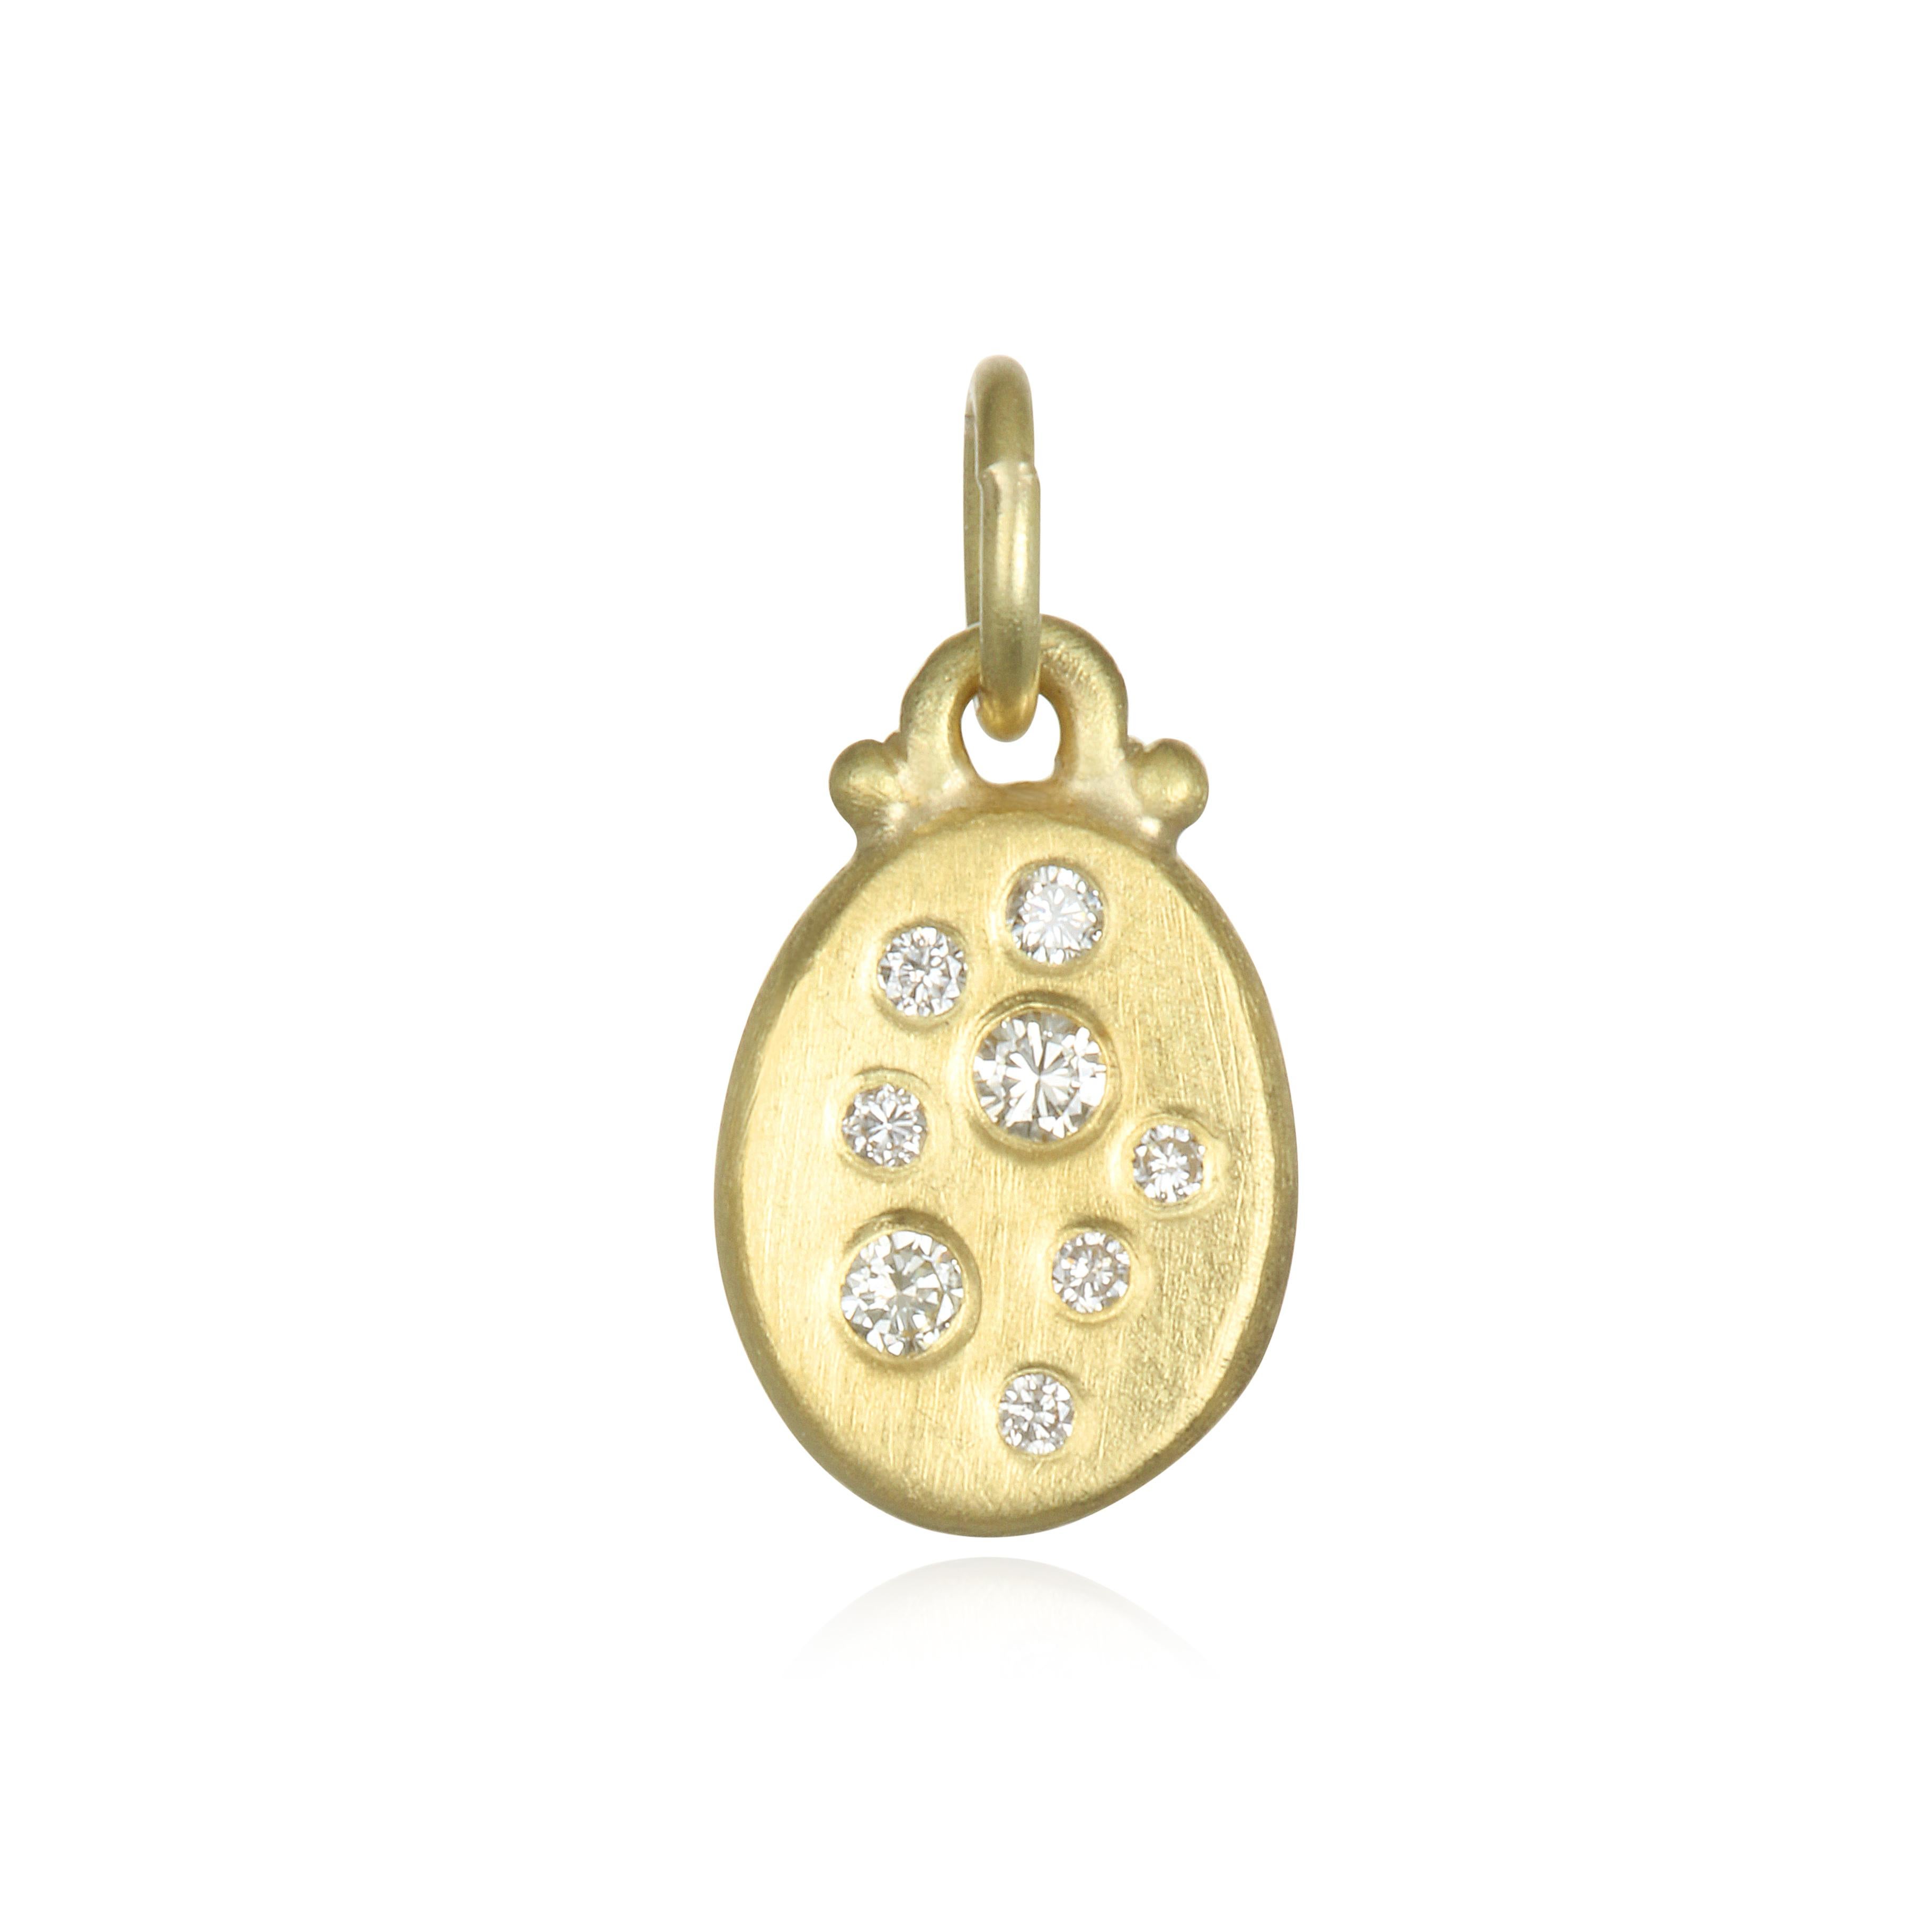 Versatile and easy to wear, the mini version of Faye Kim's popular larger diamond Dog Tag pendants is perfect for both every day and special occasion wear. The pendant is matte-finished in 18 Karat Gold. Whether worn alone or layered with other